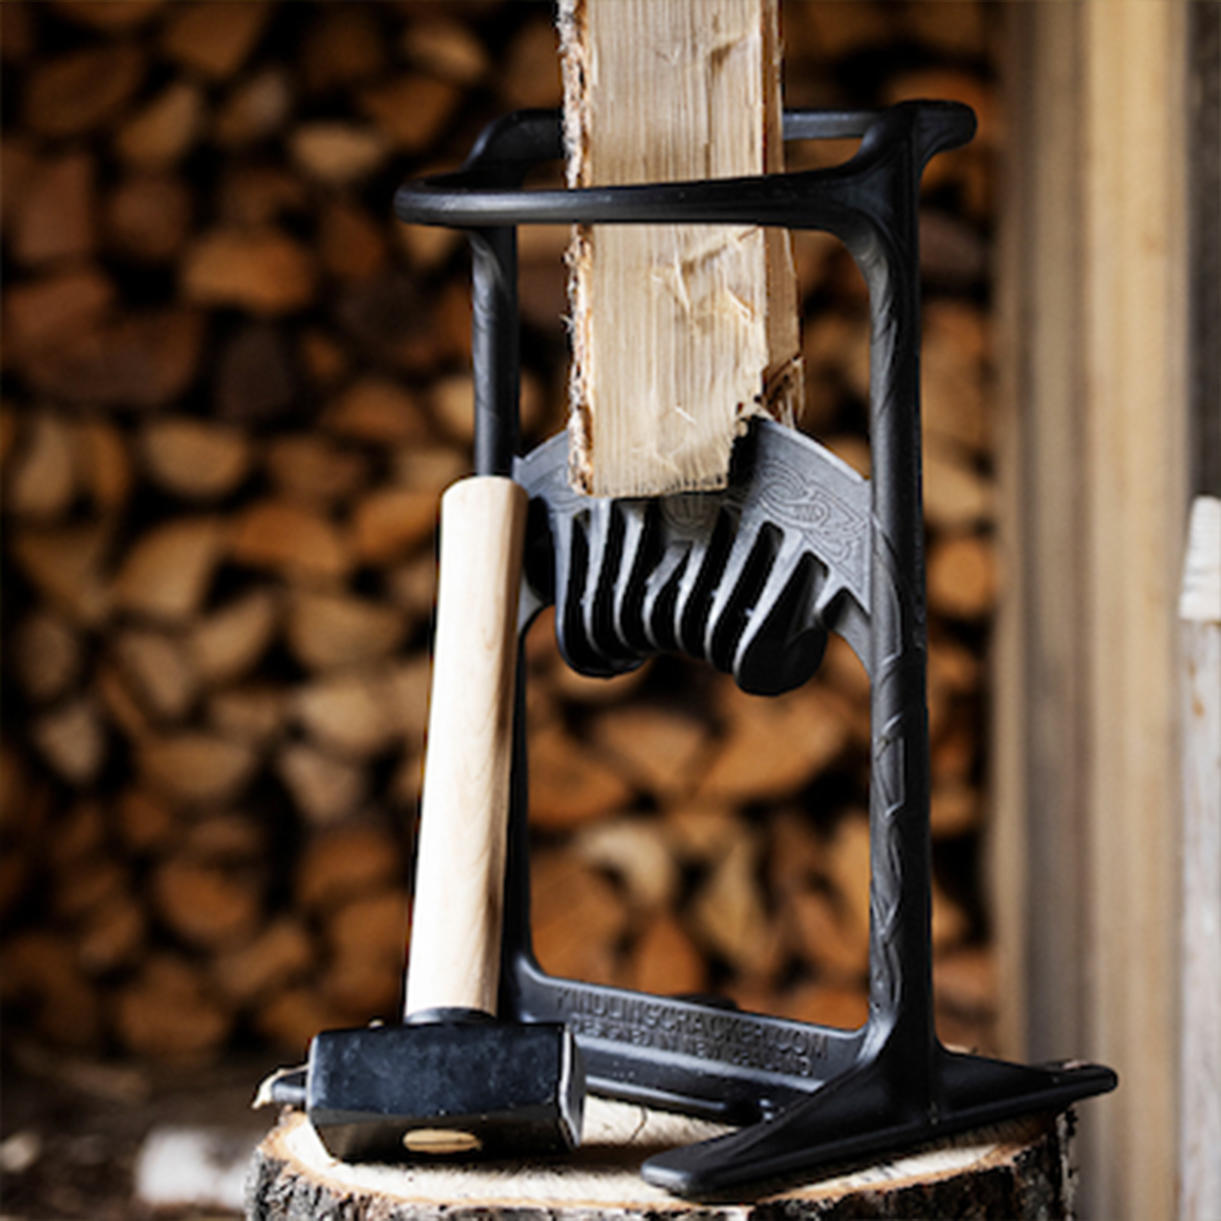 Buy Kindling Cracker Firewood Splitters — The Worm that Turned -  revitalising your outdoor space